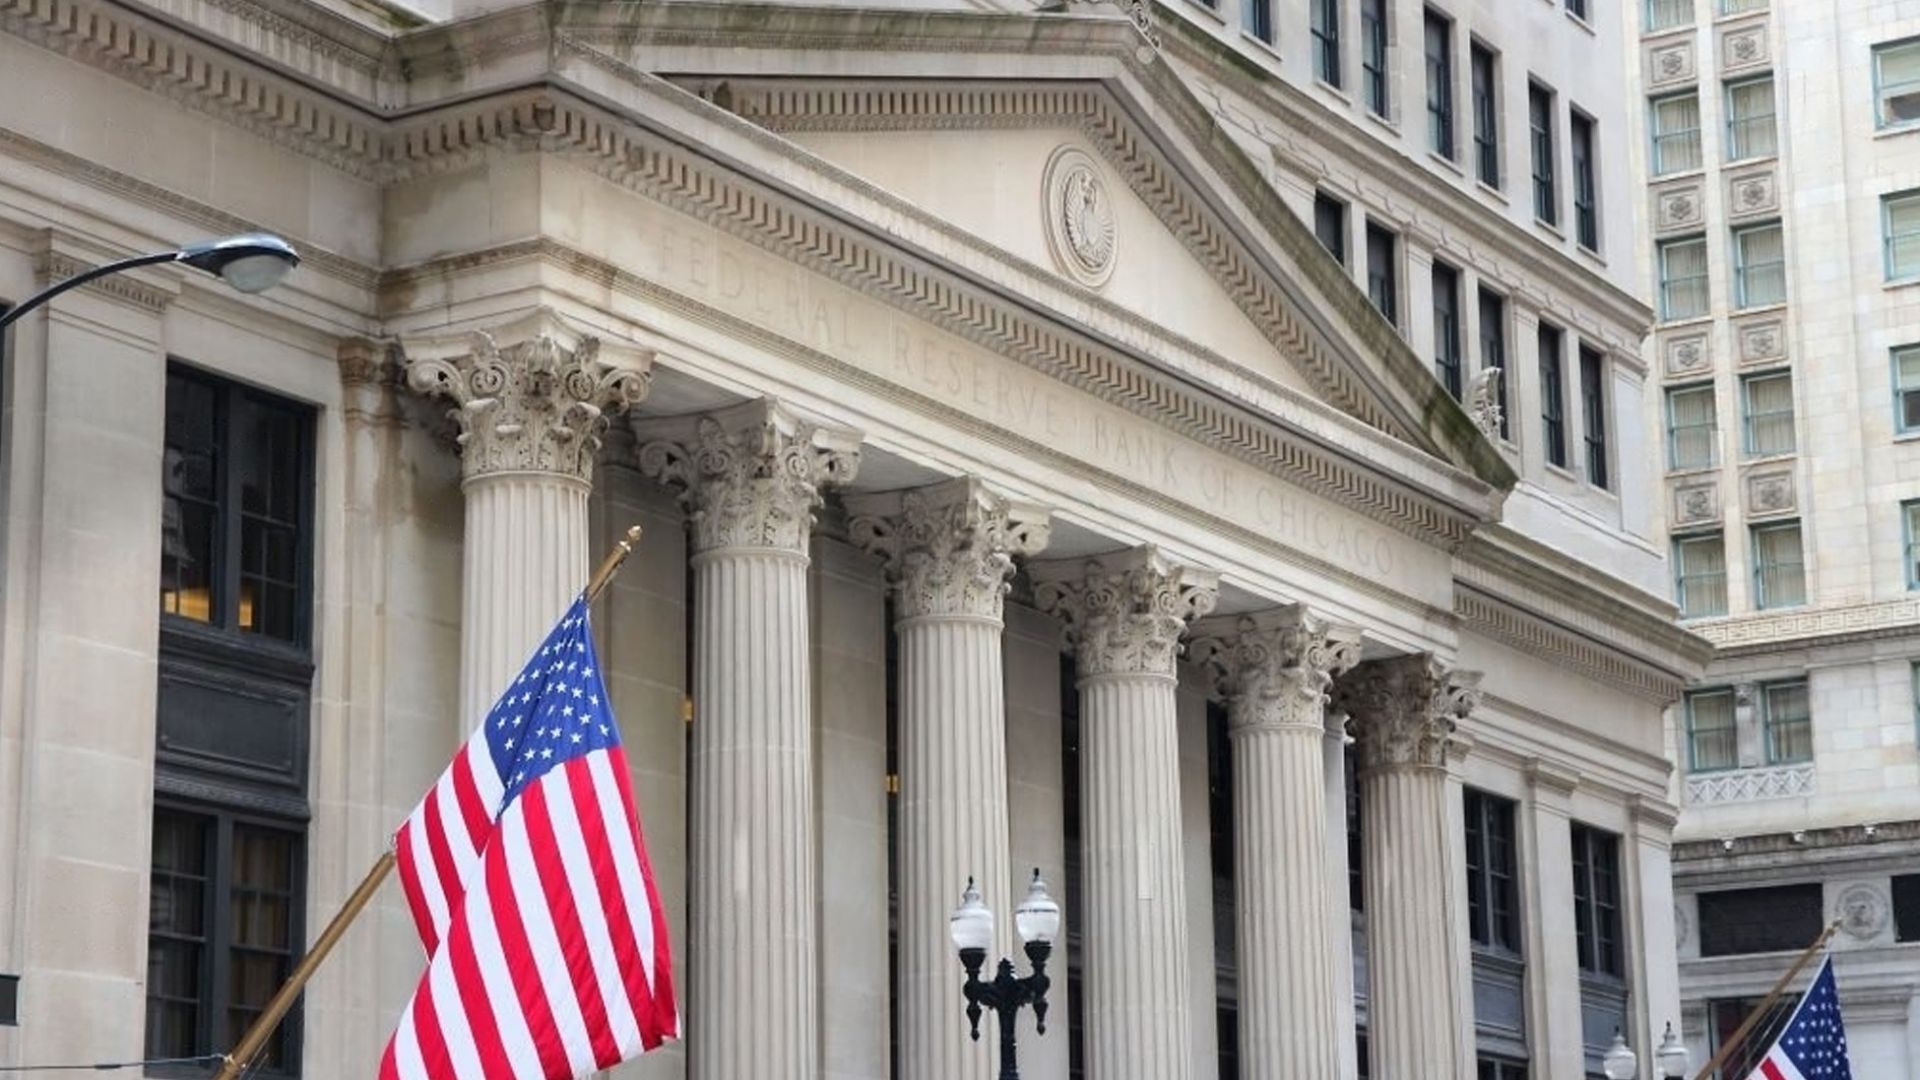 According to a recent analysis, more than 186 US banks are at risk of collapse